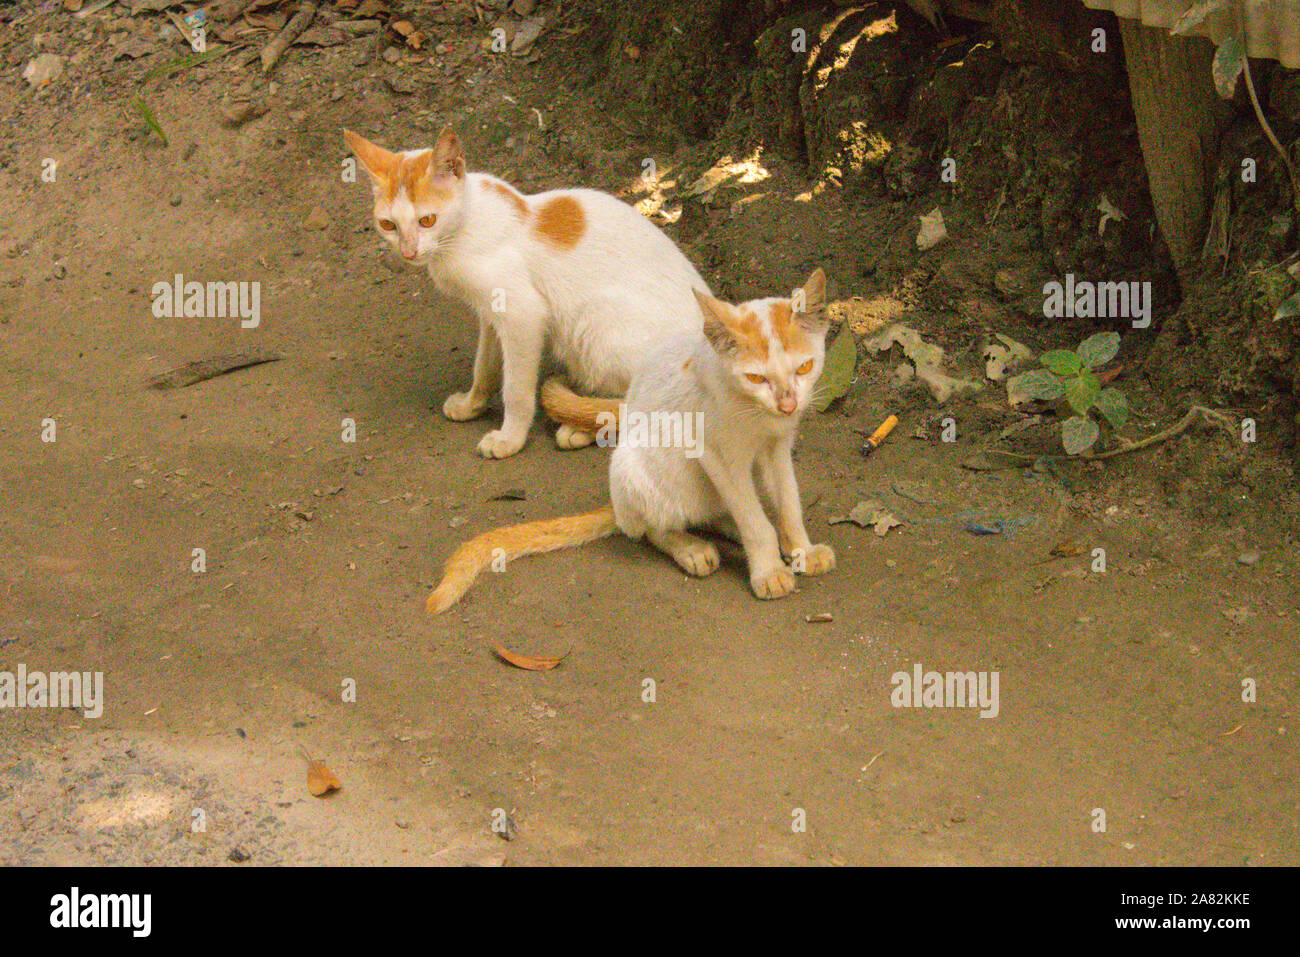 Twin white cats or a pair of cats or kitten sitting together on village street Stock Photo